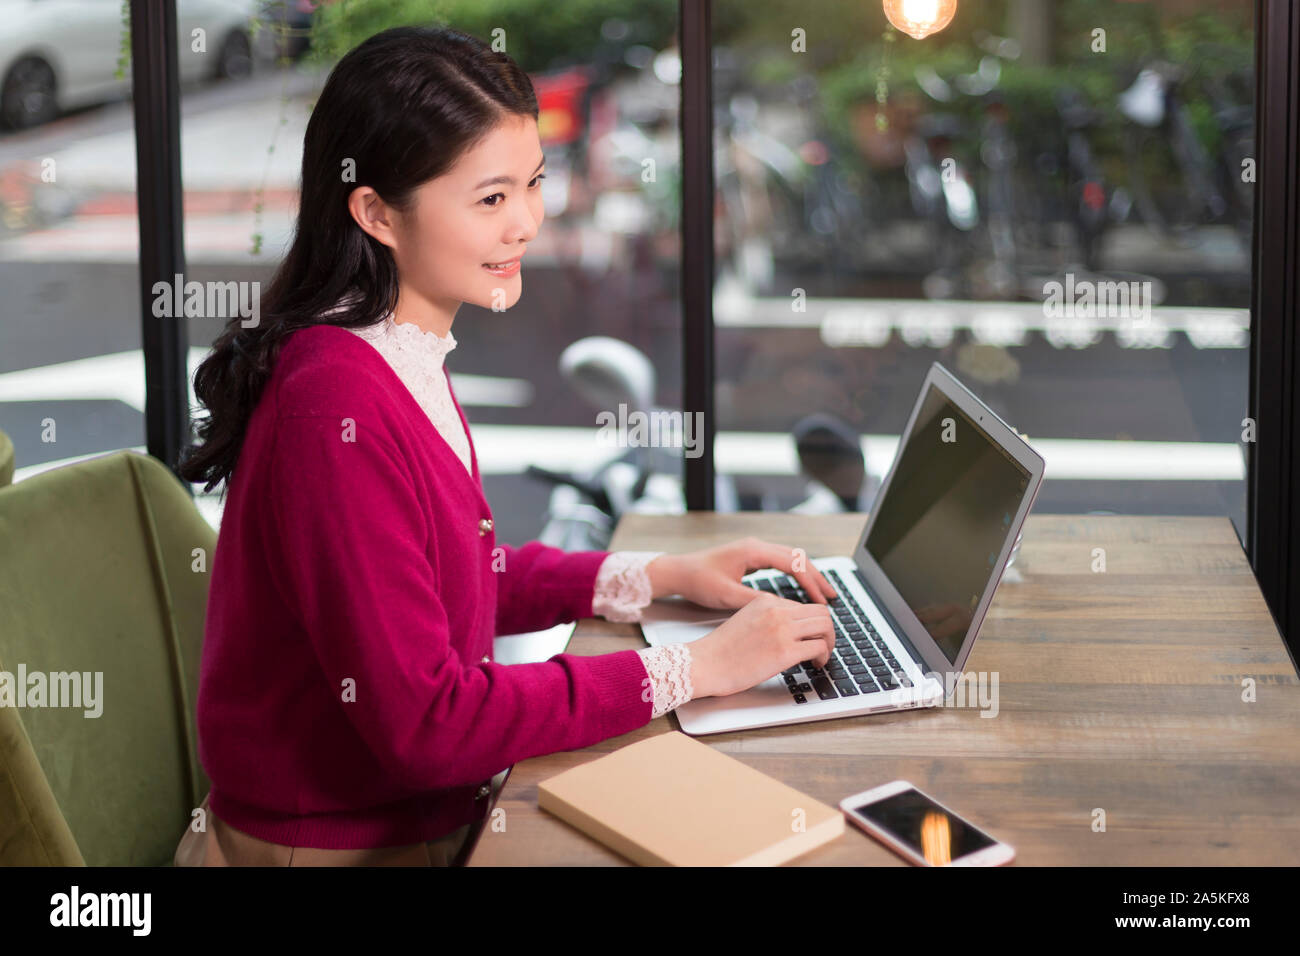 Woman working on laptop in cafe Stock Photo